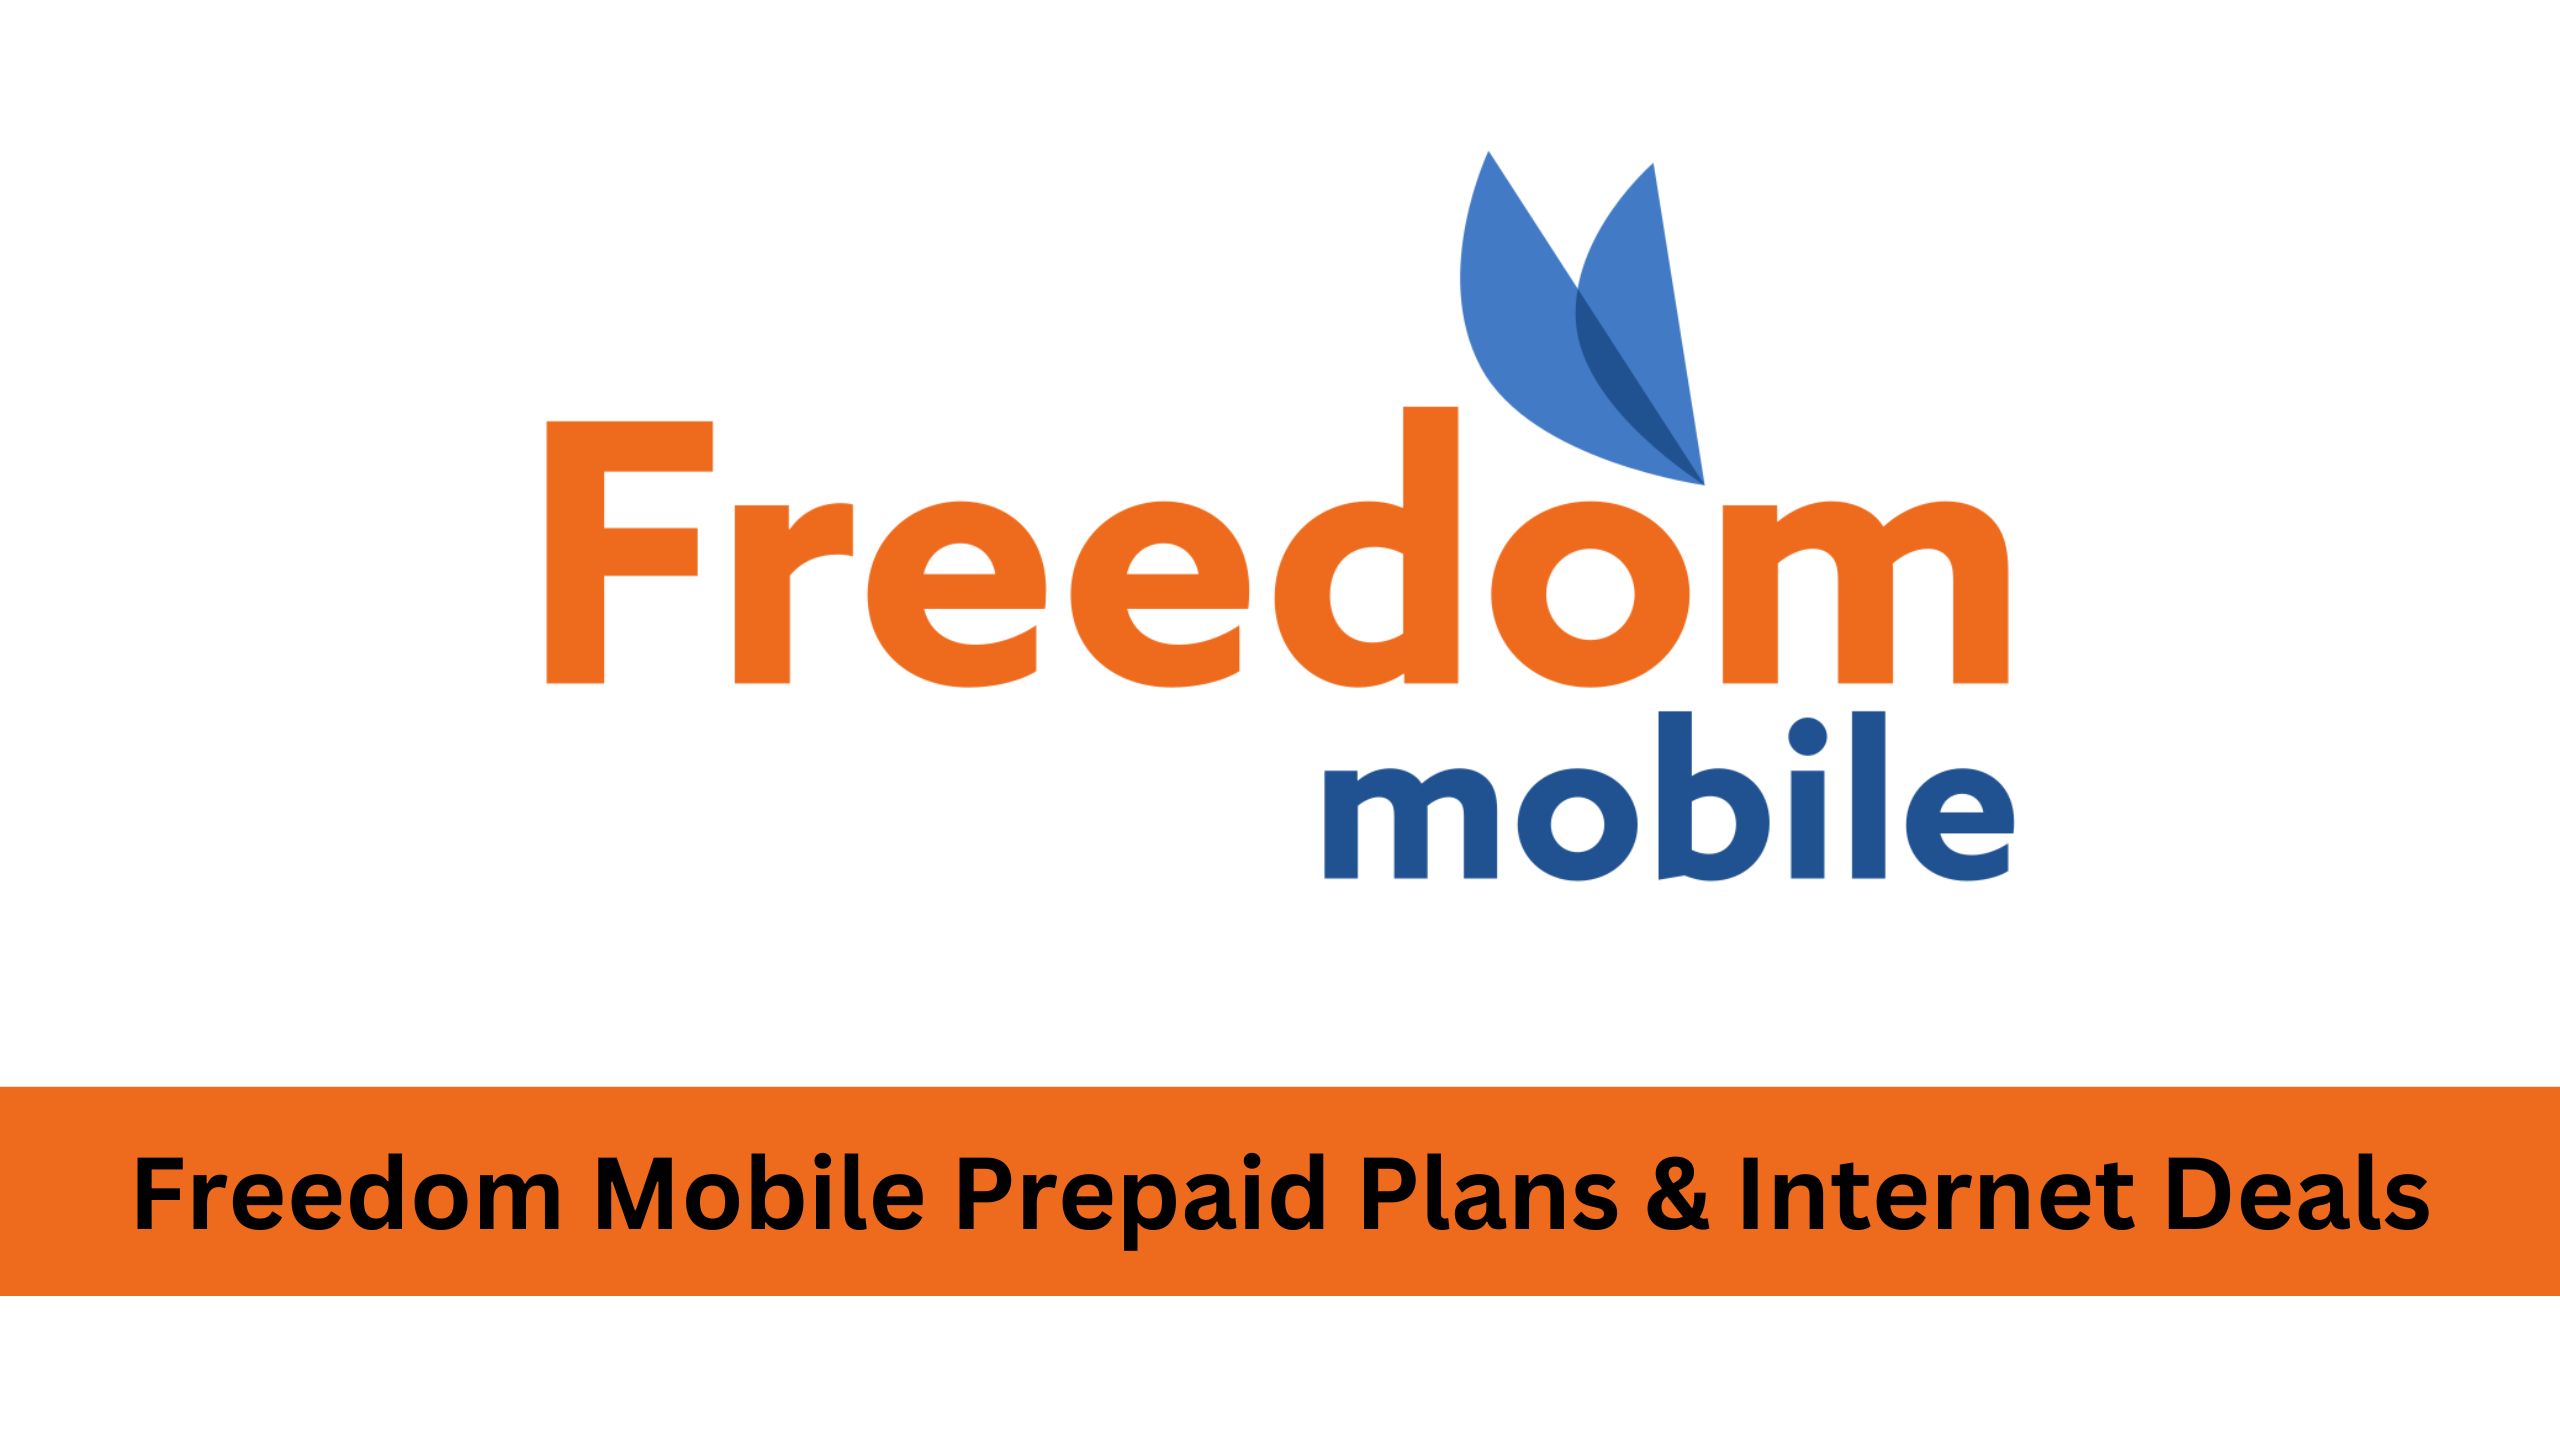 Freedom Mobile Prepaid Plans & Internet Deals: Find Your Perfect Data Offer